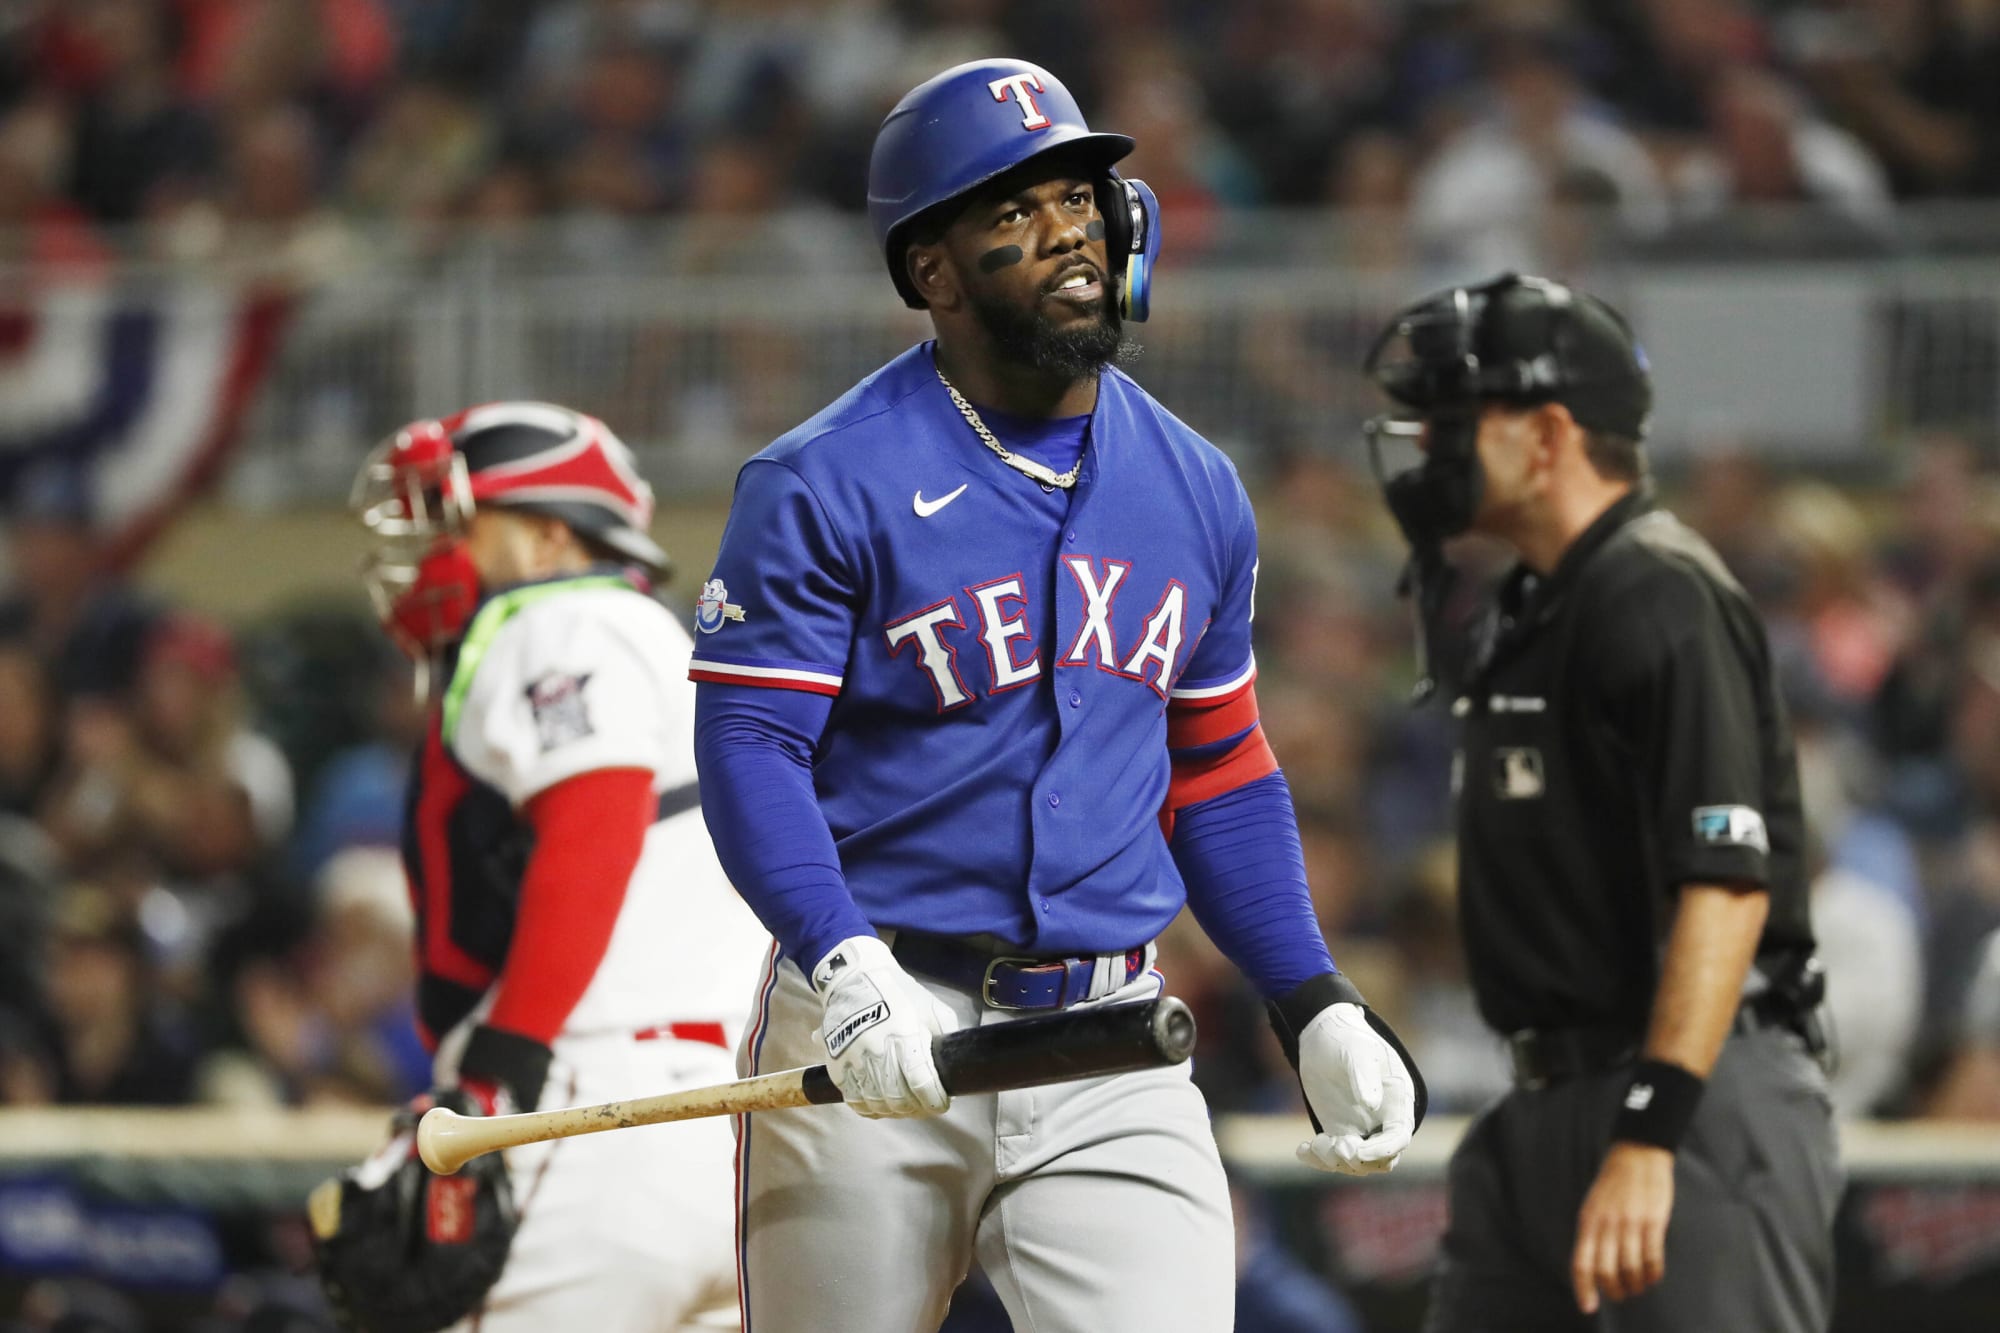 Texas Rangers and their record in onerun games a microcosm of 2022